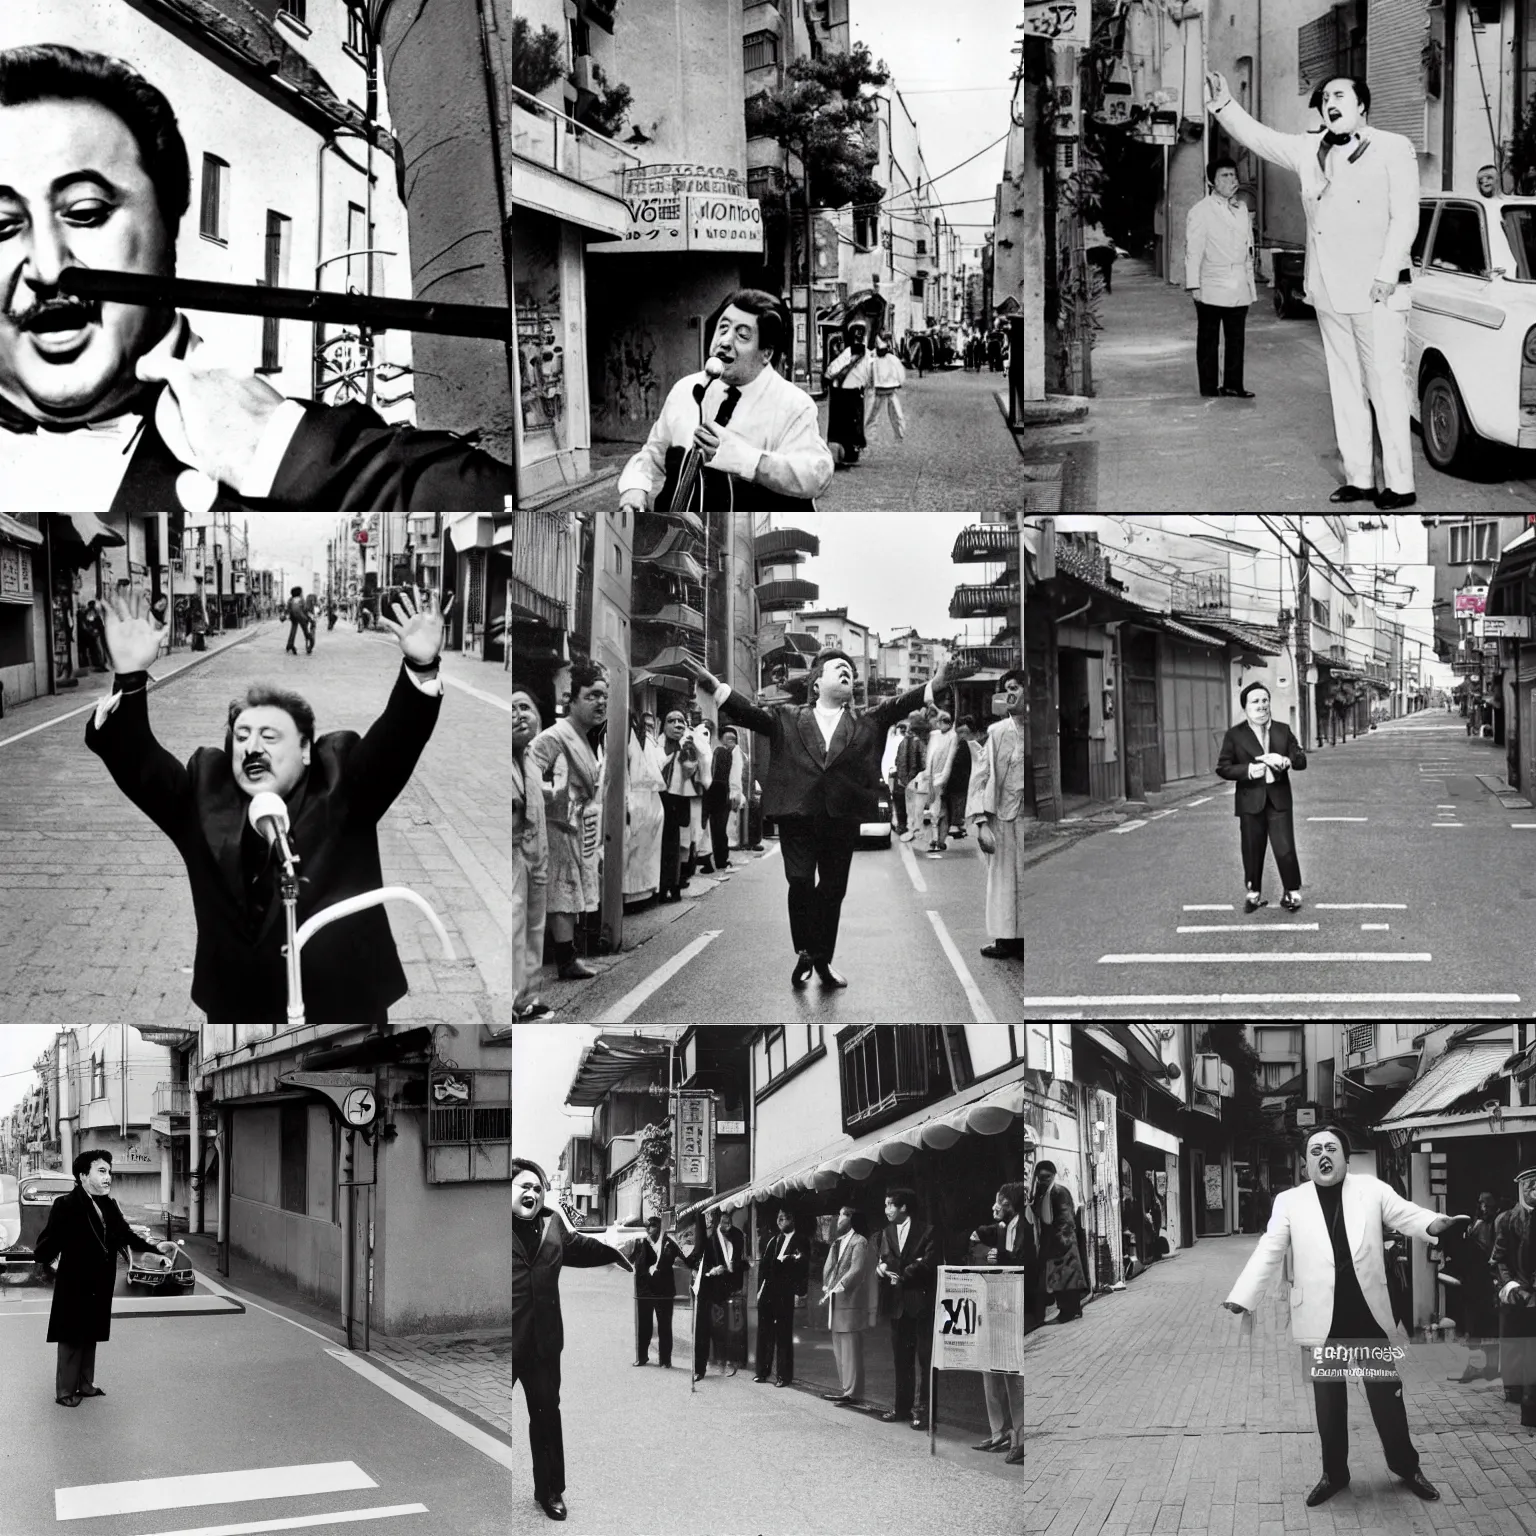 Prompt: Domenico Modugno singing Volare on a Japanese street in front of a tomare stop line written on the street